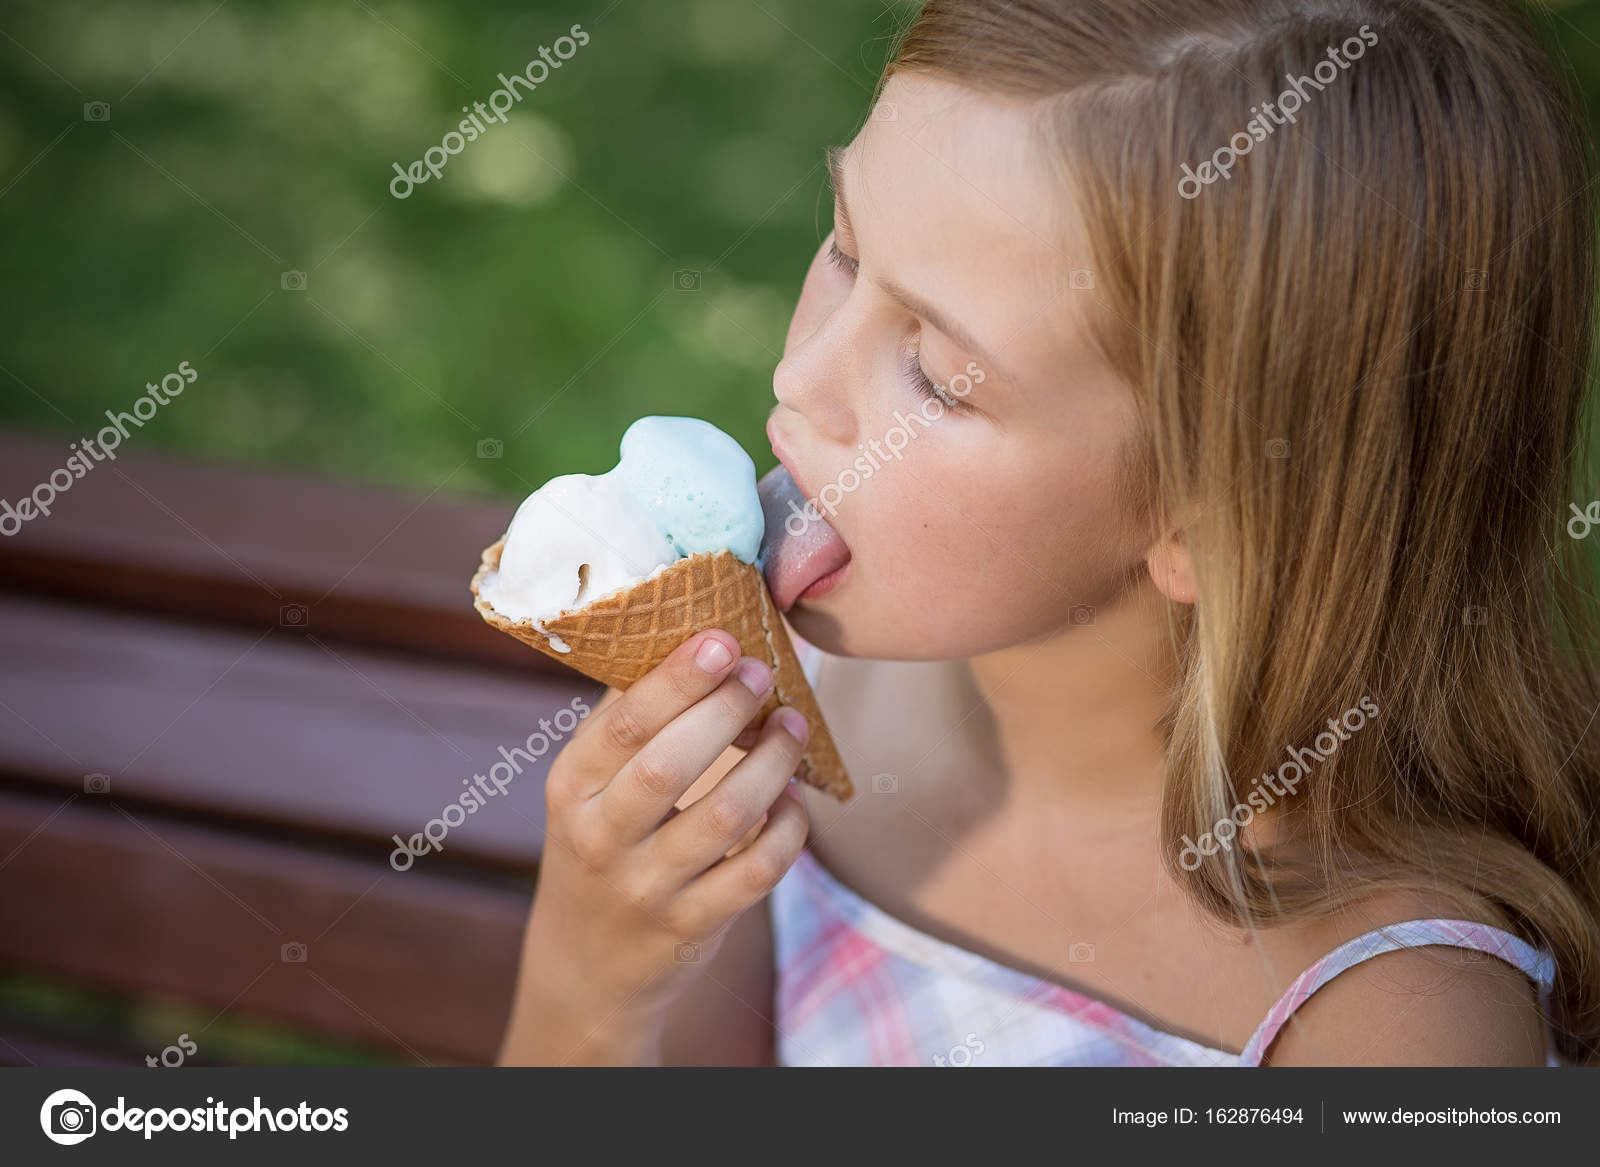 10. Little girl with blond hair and a big smile eating ice cream - wide 5